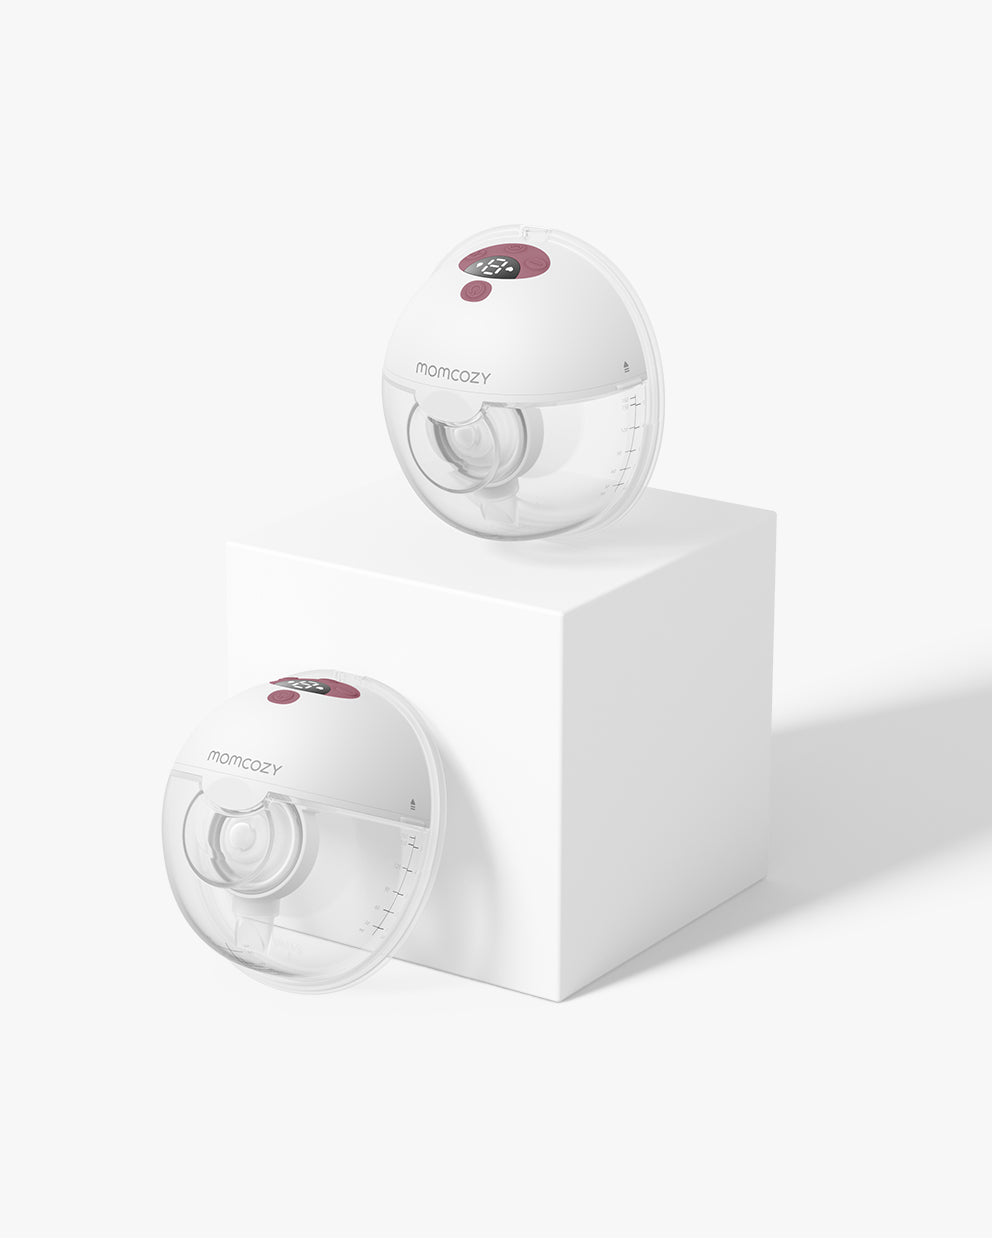 All-in-one M5 Wearable Breast Pump: Convenient & Discreet